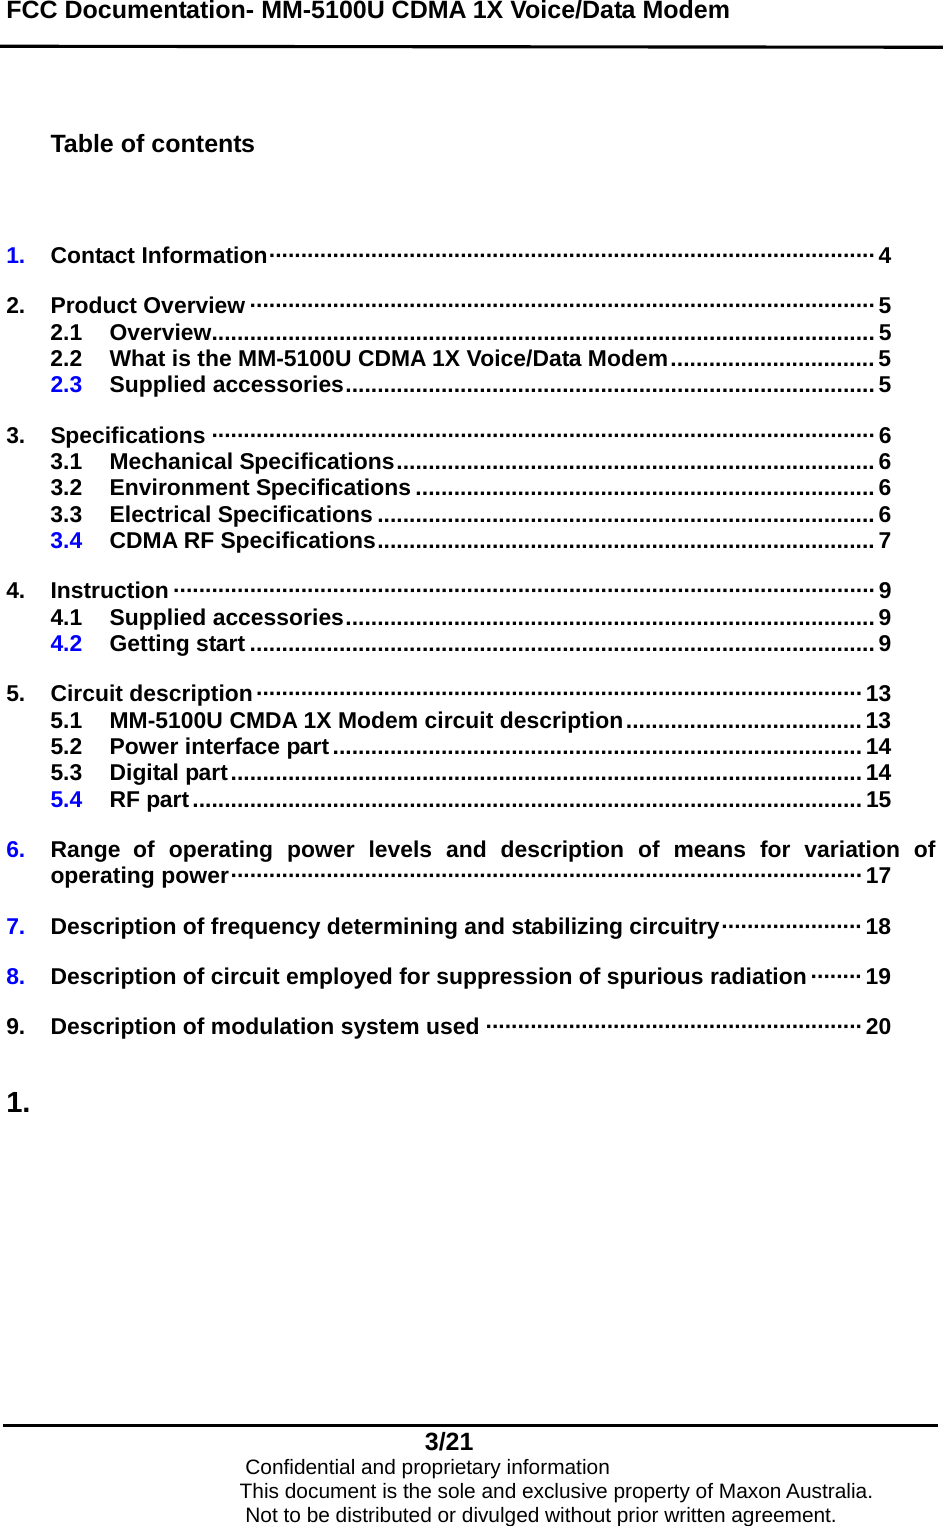 FCC Documentation- MM-5100U CDMA 1X Voice/Data Modem    Table of contents   1.  Contact Information······························································································· 4  2.  Product Overview ·································································································· 5 2.1  Overview........................................................................................................ 5 2.2  What is the MM-5100U CDMA 1X Voice/Data Modem................................ 5 2.3  Supplied accessories...................................................................................5  3.  Specifications ········································································································6 3.1  Mechanical Specifications...........................................................................6 3.2  Environment Specifications ........................................................................ 6 3.3  Electrical Specifications .............................................................................. 6 3.4  CDMA RF Specifications.............................................................................. 7  4.  Instruction ·············································································································· 9 4.1  Supplied accessories...................................................................................9 4.2  Getting start .................................................................................................. 9  5.  Circuit description·······························································································13 5.1  MM-5100U CMDA 1X Modem circuit description..................................... 13 5.2  Power interface part ................................................................................... 14 5.3  Digital part...................................................................................................14 5.4  RF part......................................................................................................... 15  6.  Range of operating power levels and description of means for variation of operating power··································································································· 17  7.  Description of frequency determining and stabilizing circuitry······················ 18  8.  Description of circuit employed for suppression of spurious radiation ········ 19  9.  Description of modulation system used ···························································20  1.  3/21                            Confidential and proprietary information                       This document is the sole and exclusive property of Maxon Australia.                           Not to be distributed or divulged without prior written agreement. 